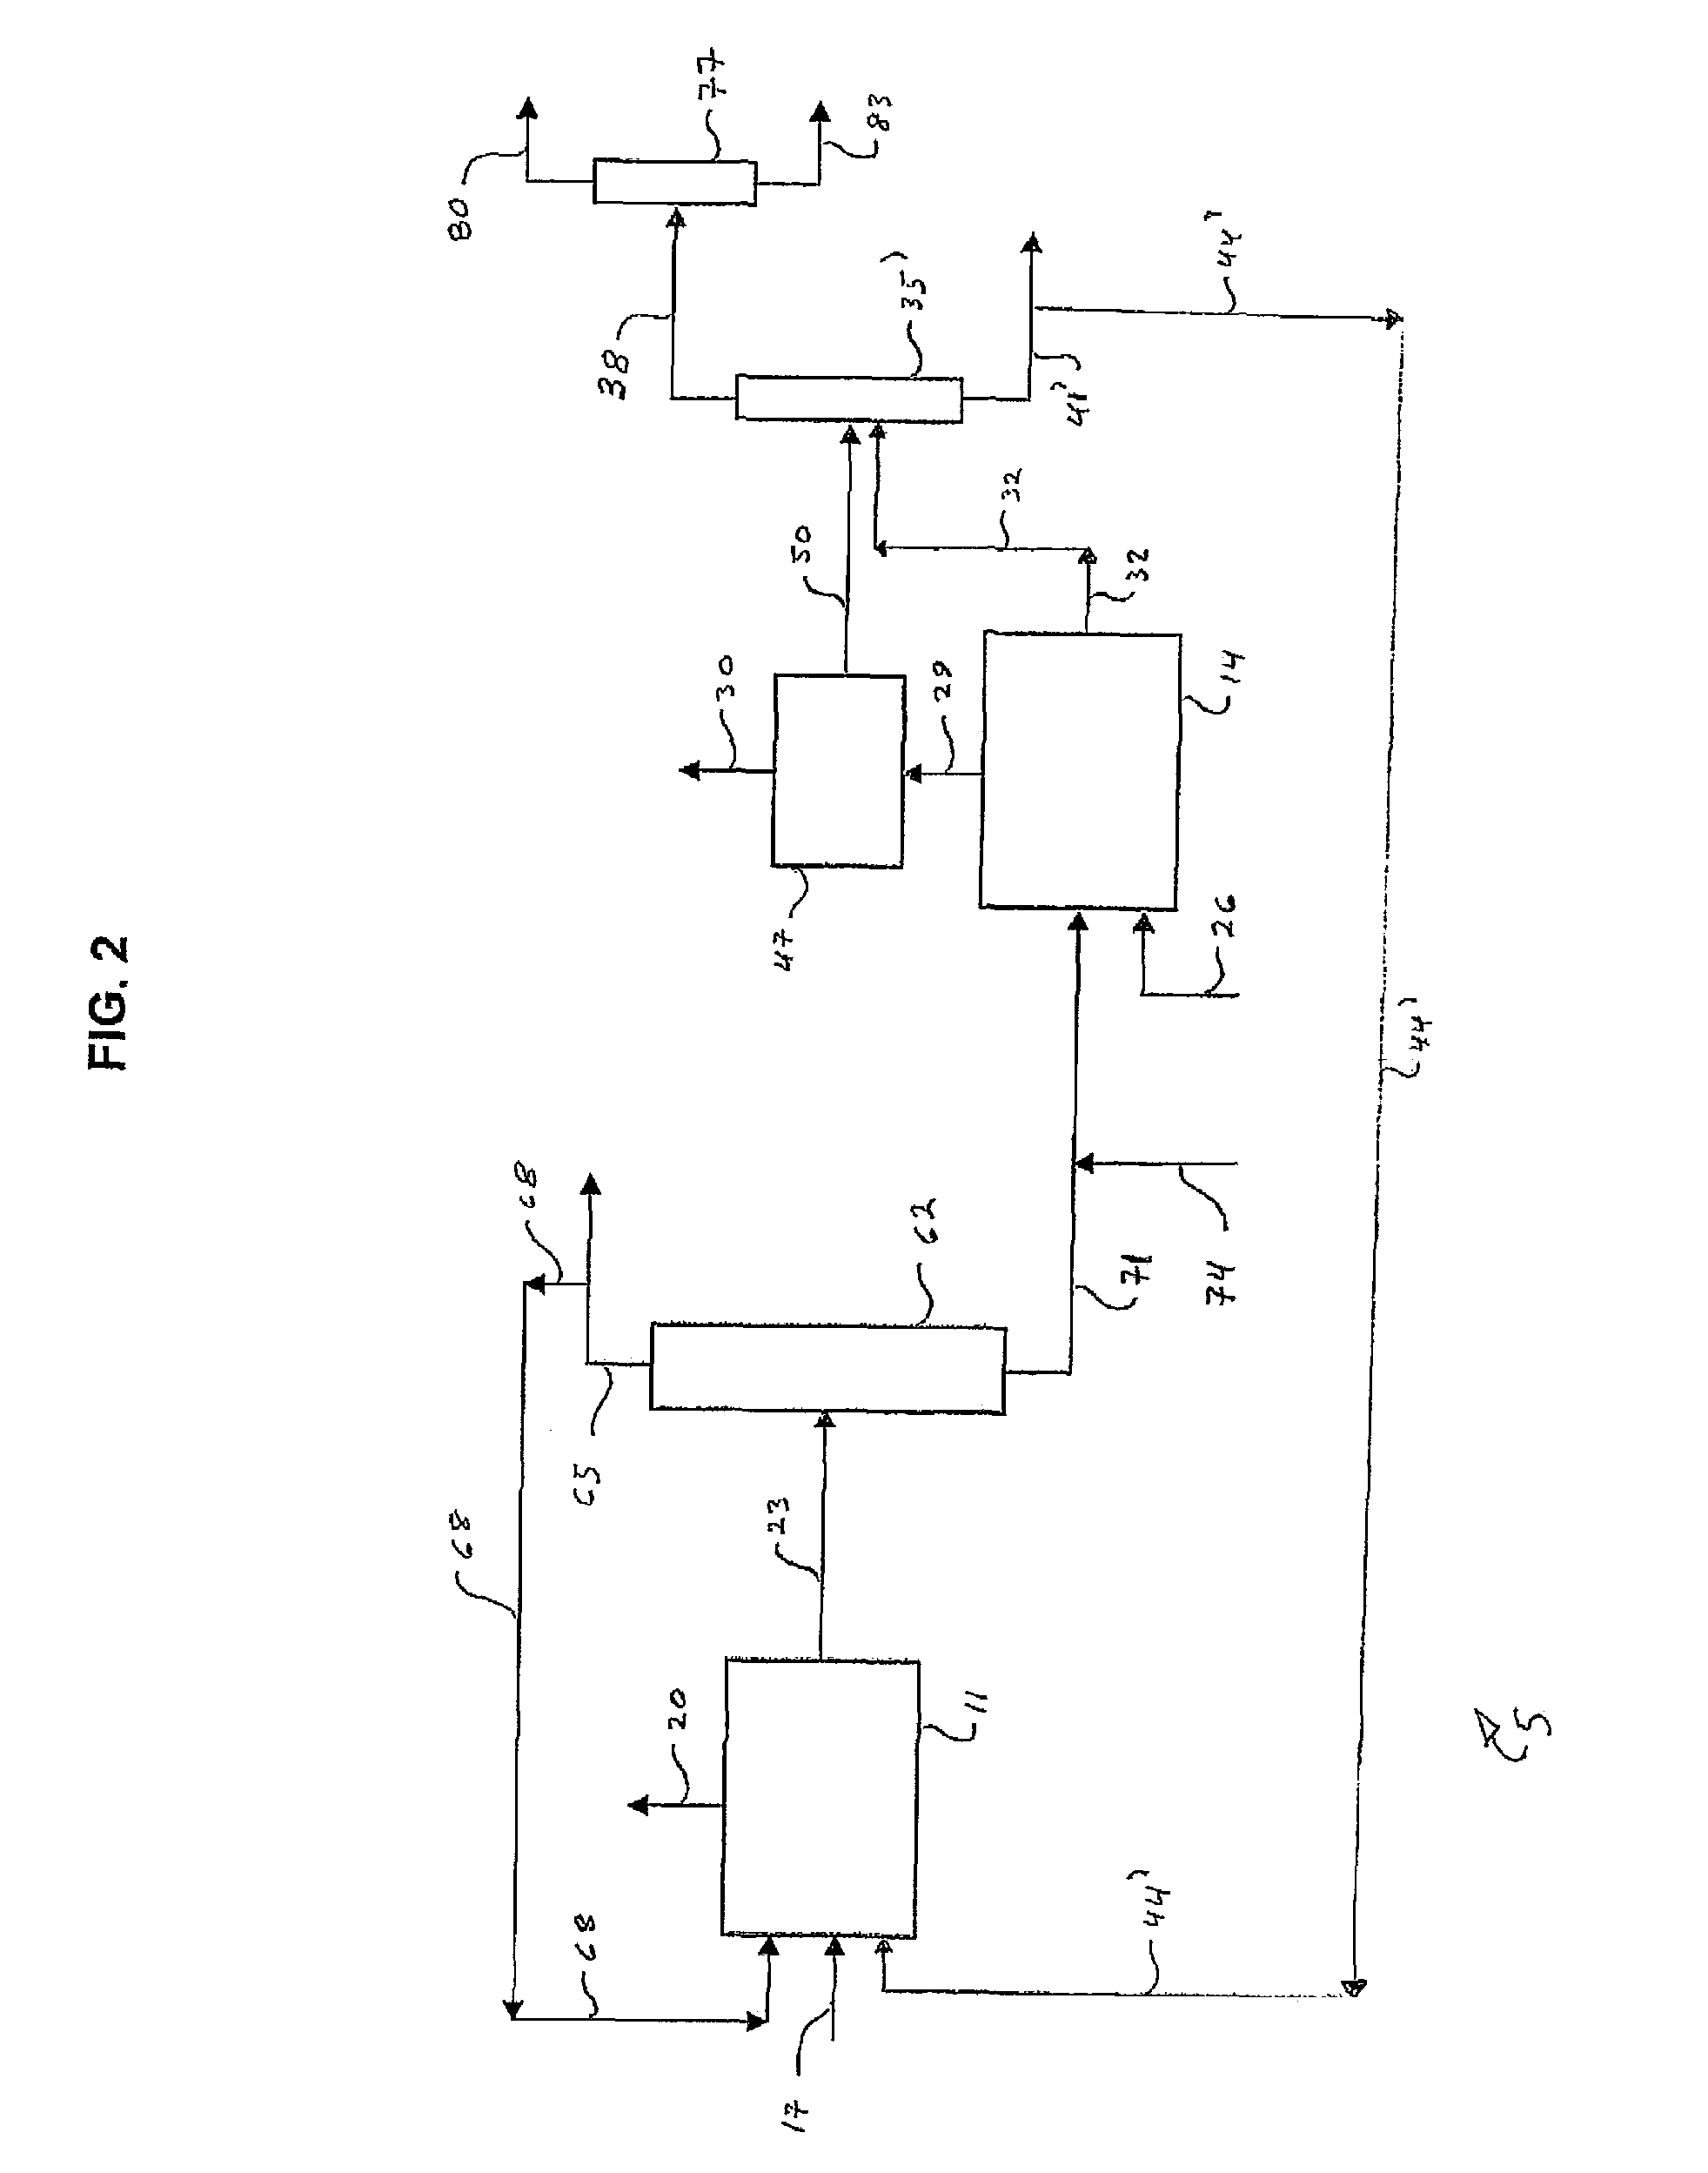 Processes for producing chlorinated hydrocarbons and methods for recovering polyvalent antimony catalysts therefrom